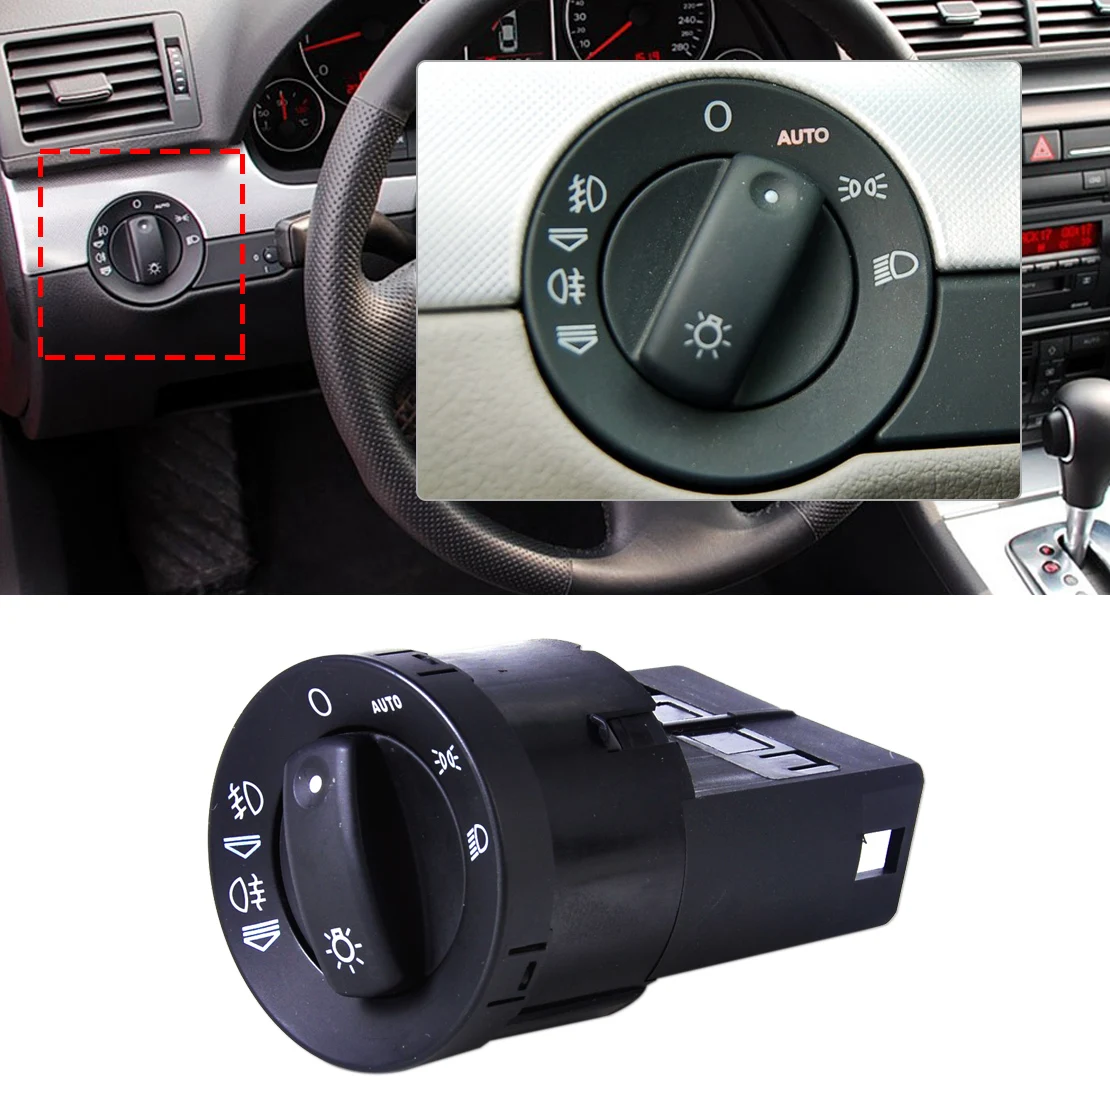 Headlight Control Fog Light Switch 8E0941531A W/O AUTO Function For Audi A4 S4 B6 Quattro From Madlife Garage 